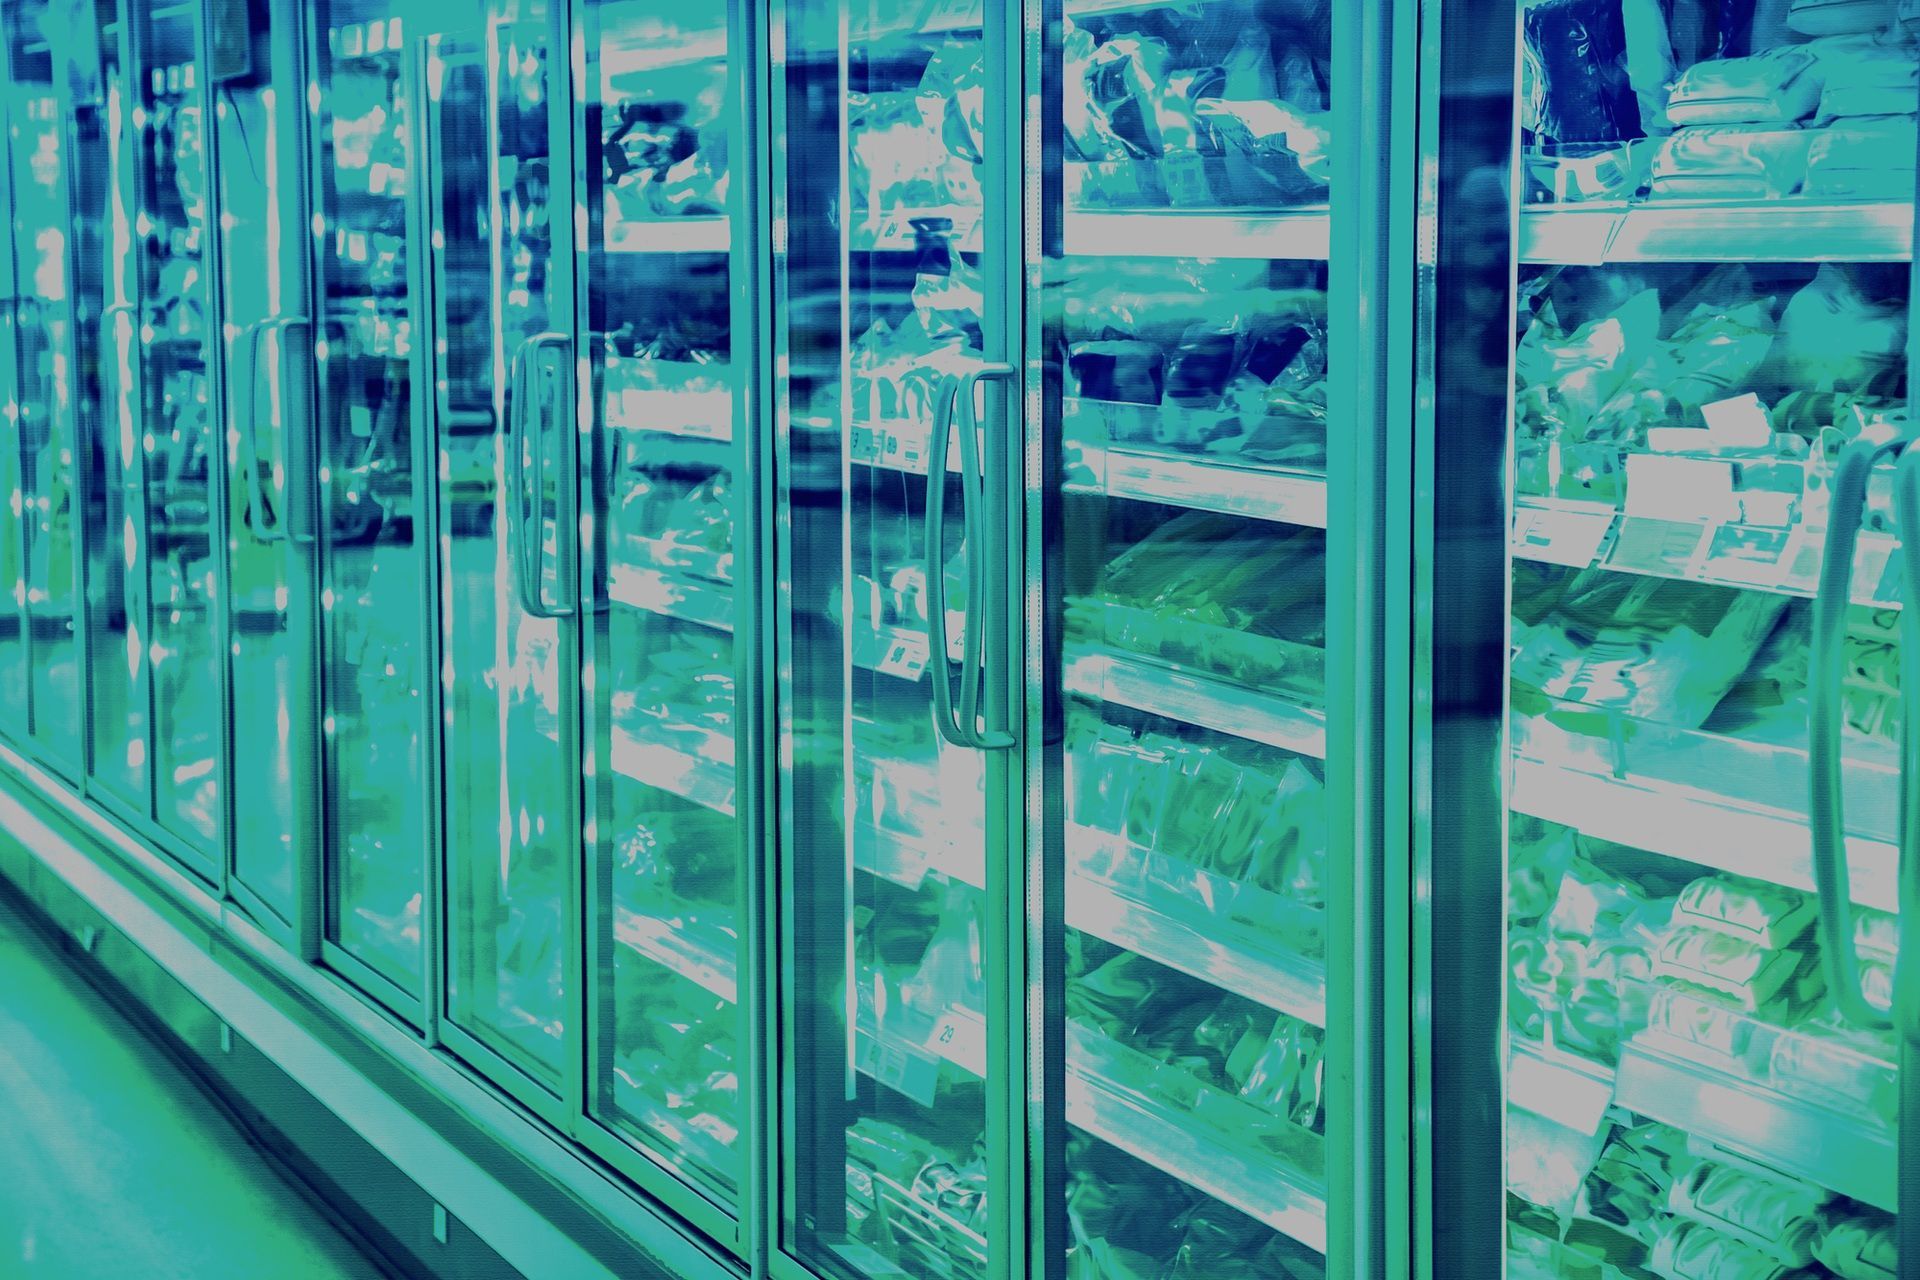 Row of freezers and foods in a store - blue/green filter